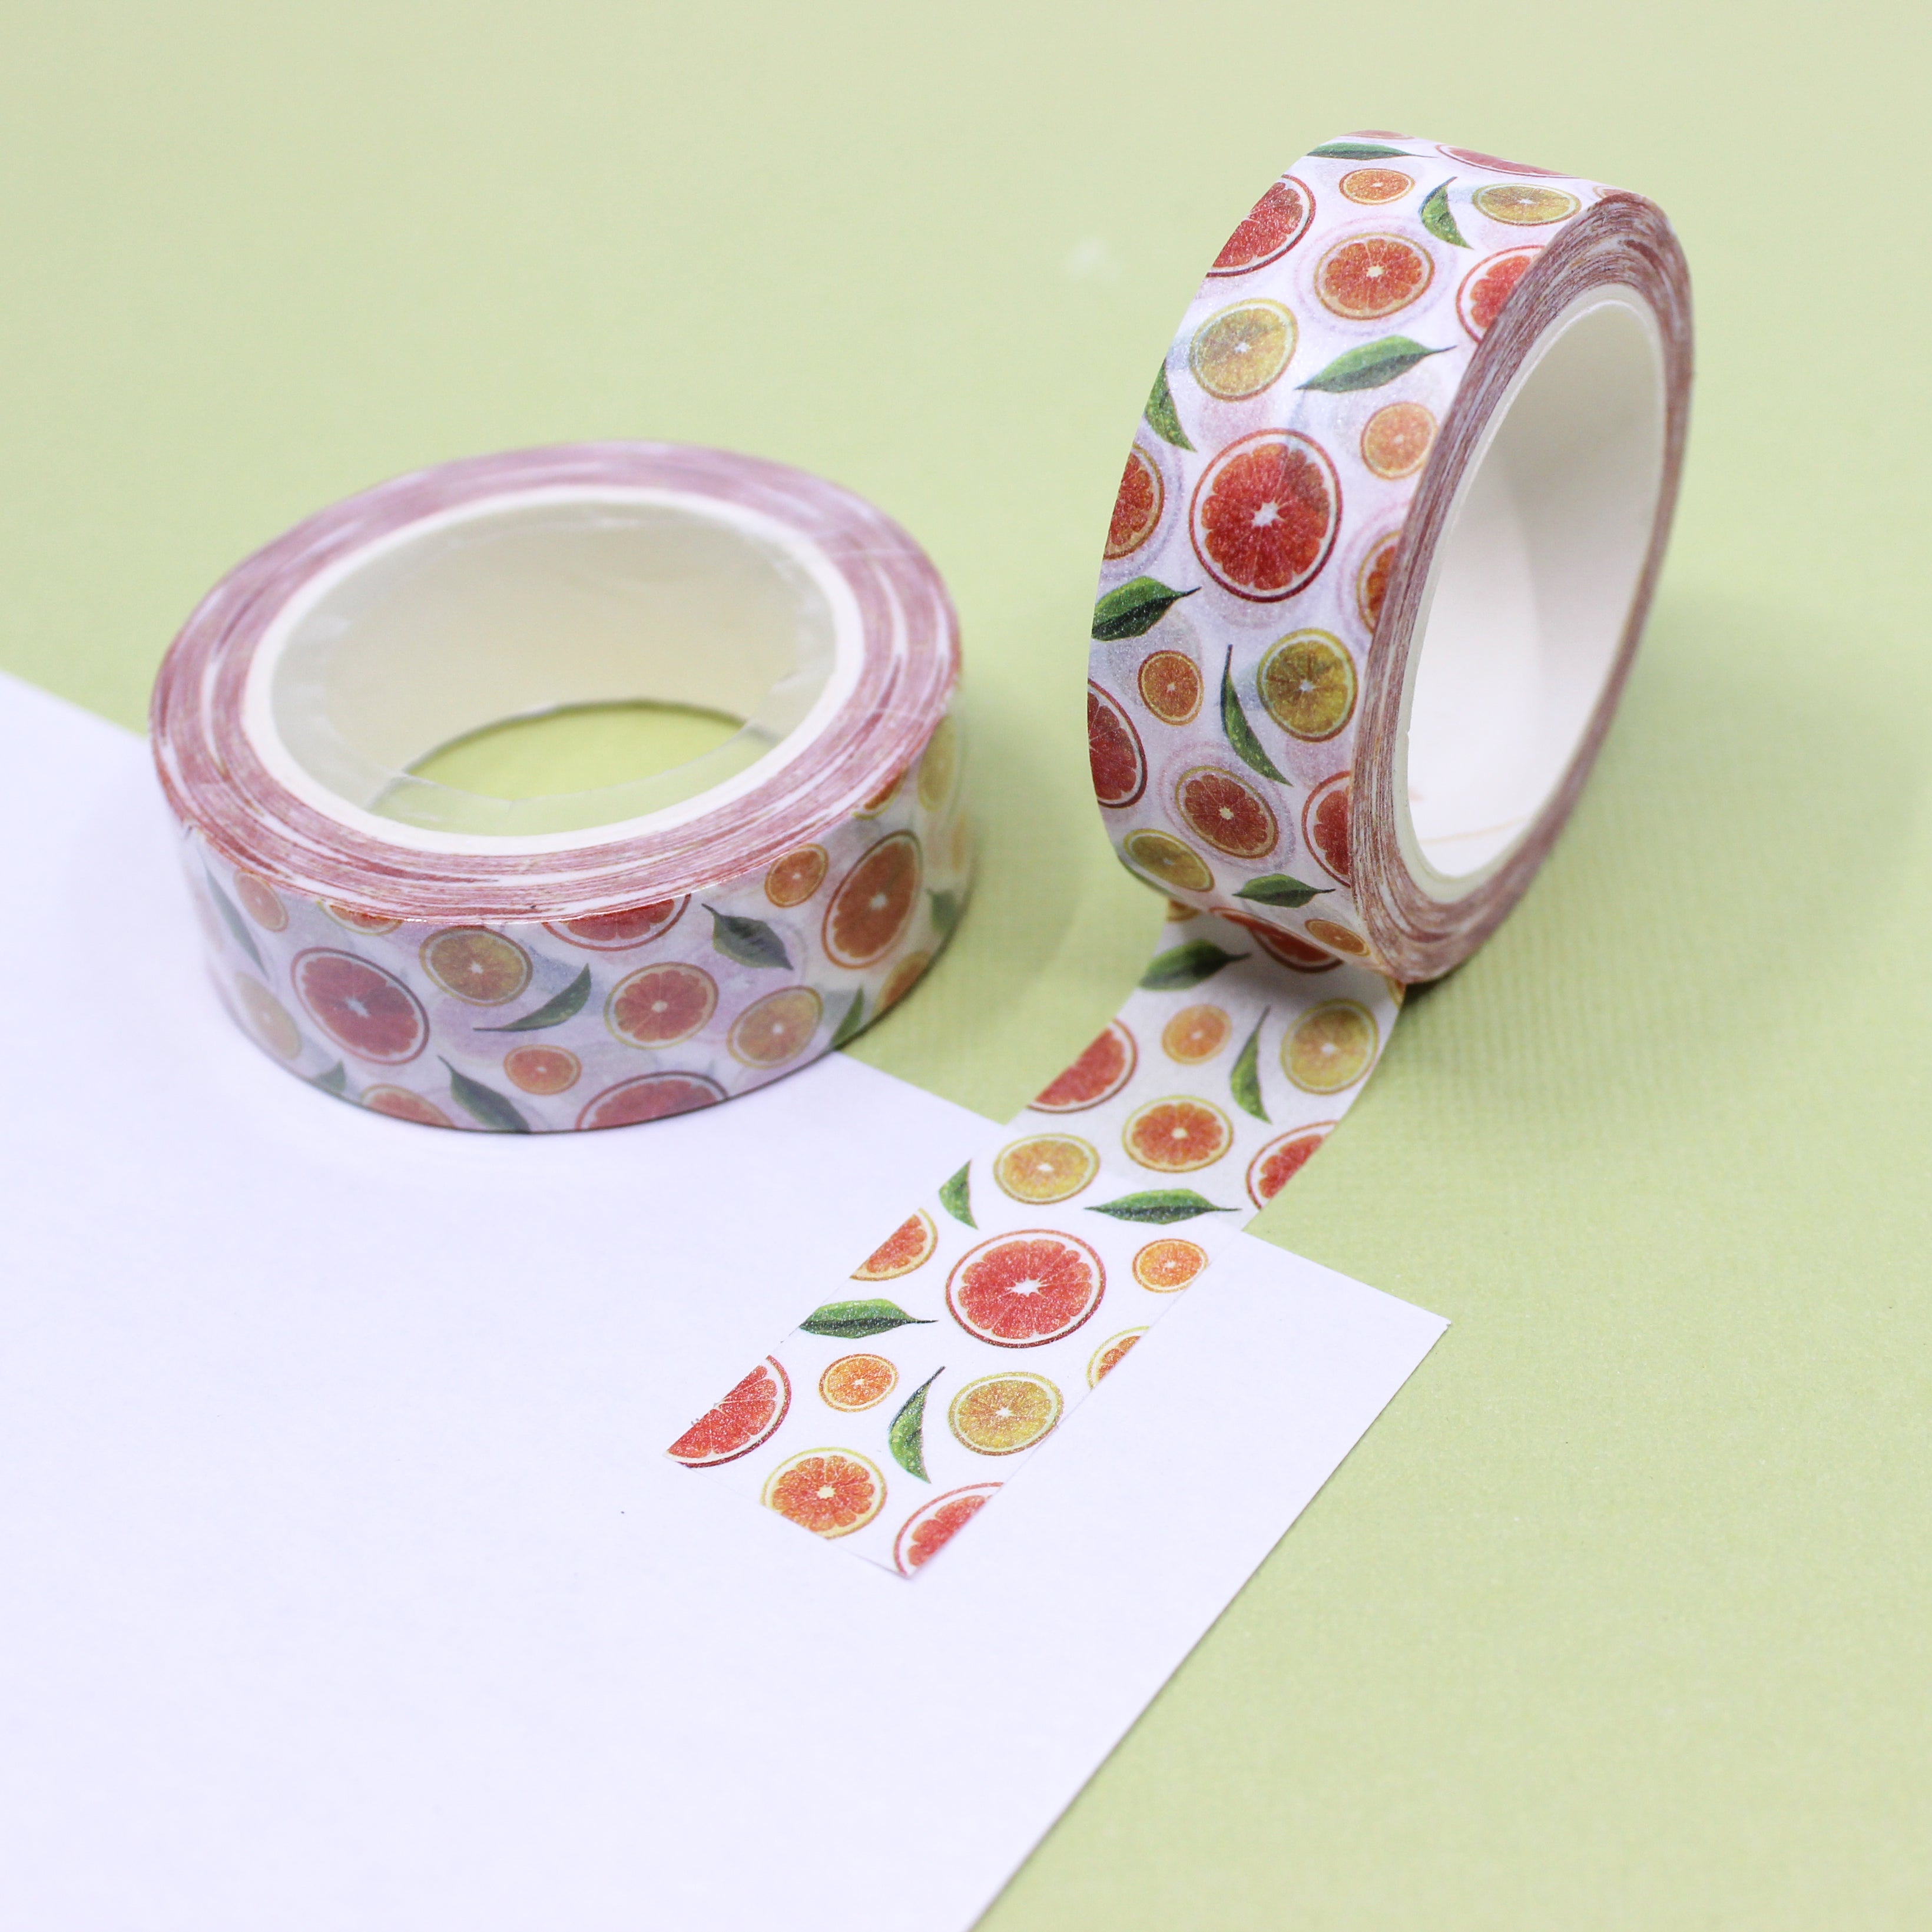 This is a grapefruit tropical fruit collections pattern washi tape from BBB Supplies Craft Shop